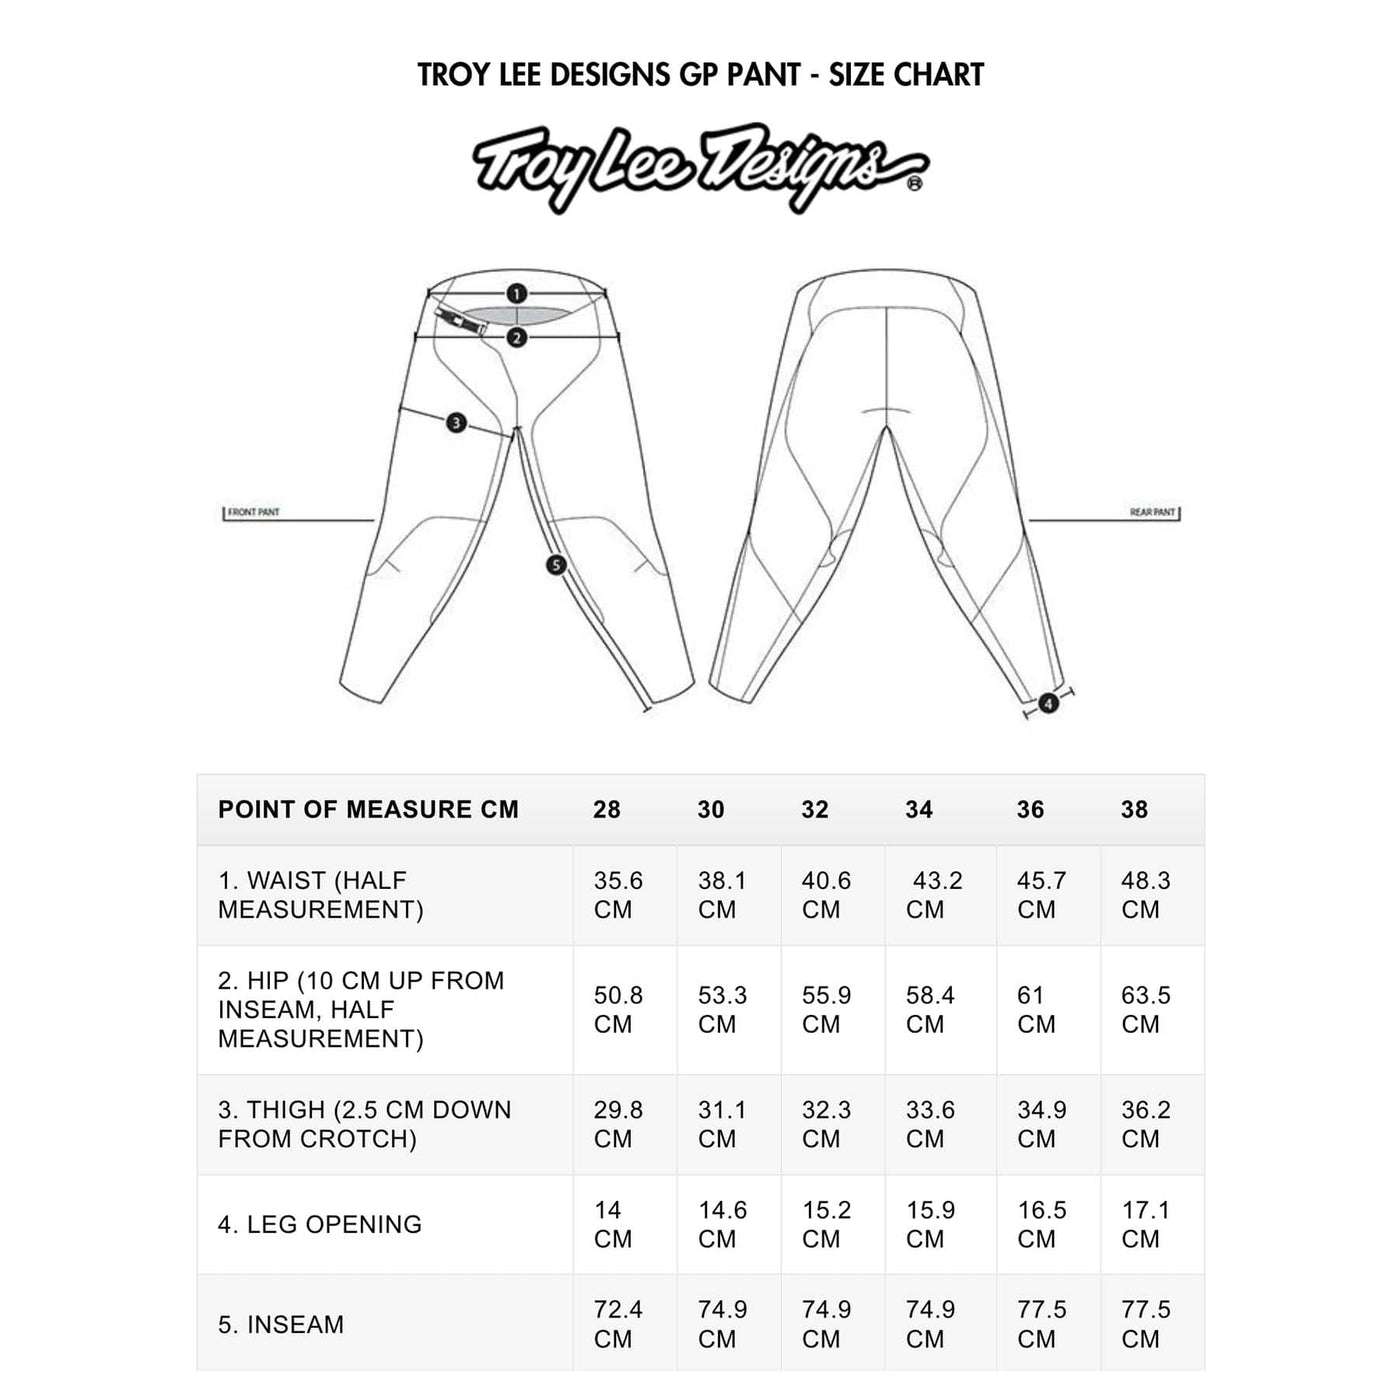 TROY LEE DESIGNS GP PANTS - SIZE CHART | 8Lines.eu - Fast Shipping, good prices!